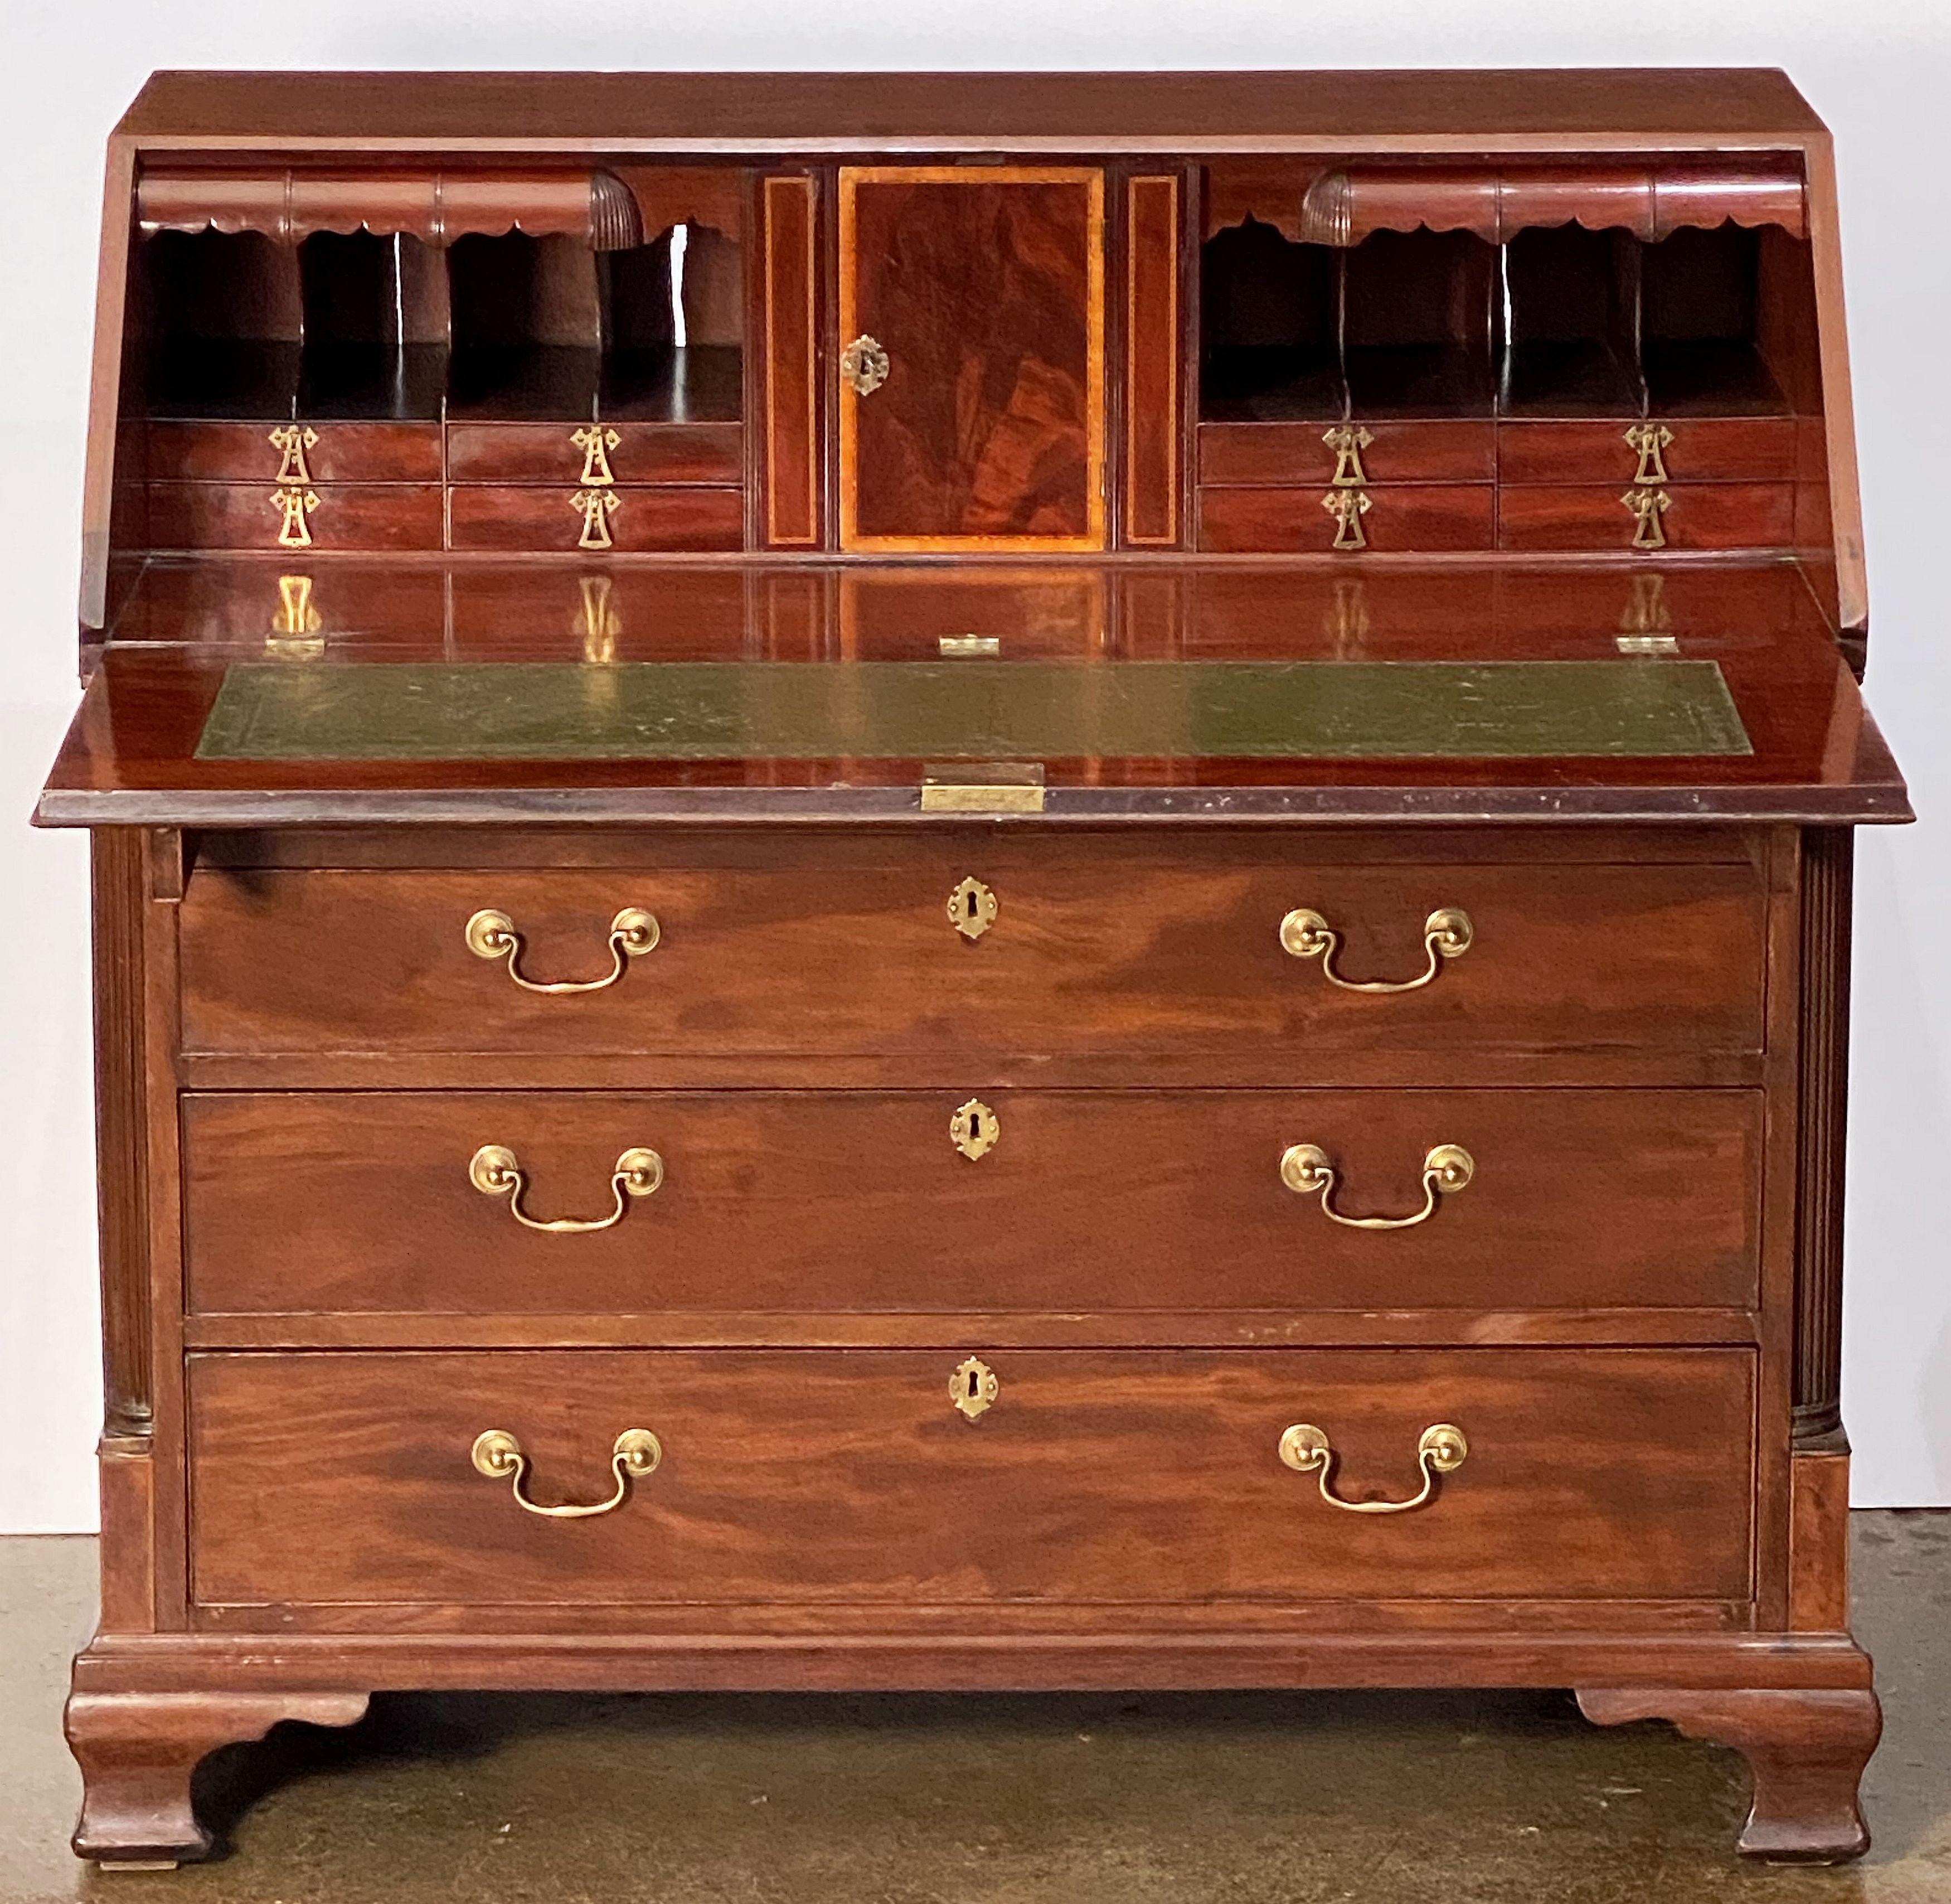 George III Bureau Desk or Secretary Chest of Mahogany from the 18th Century For Sale 4